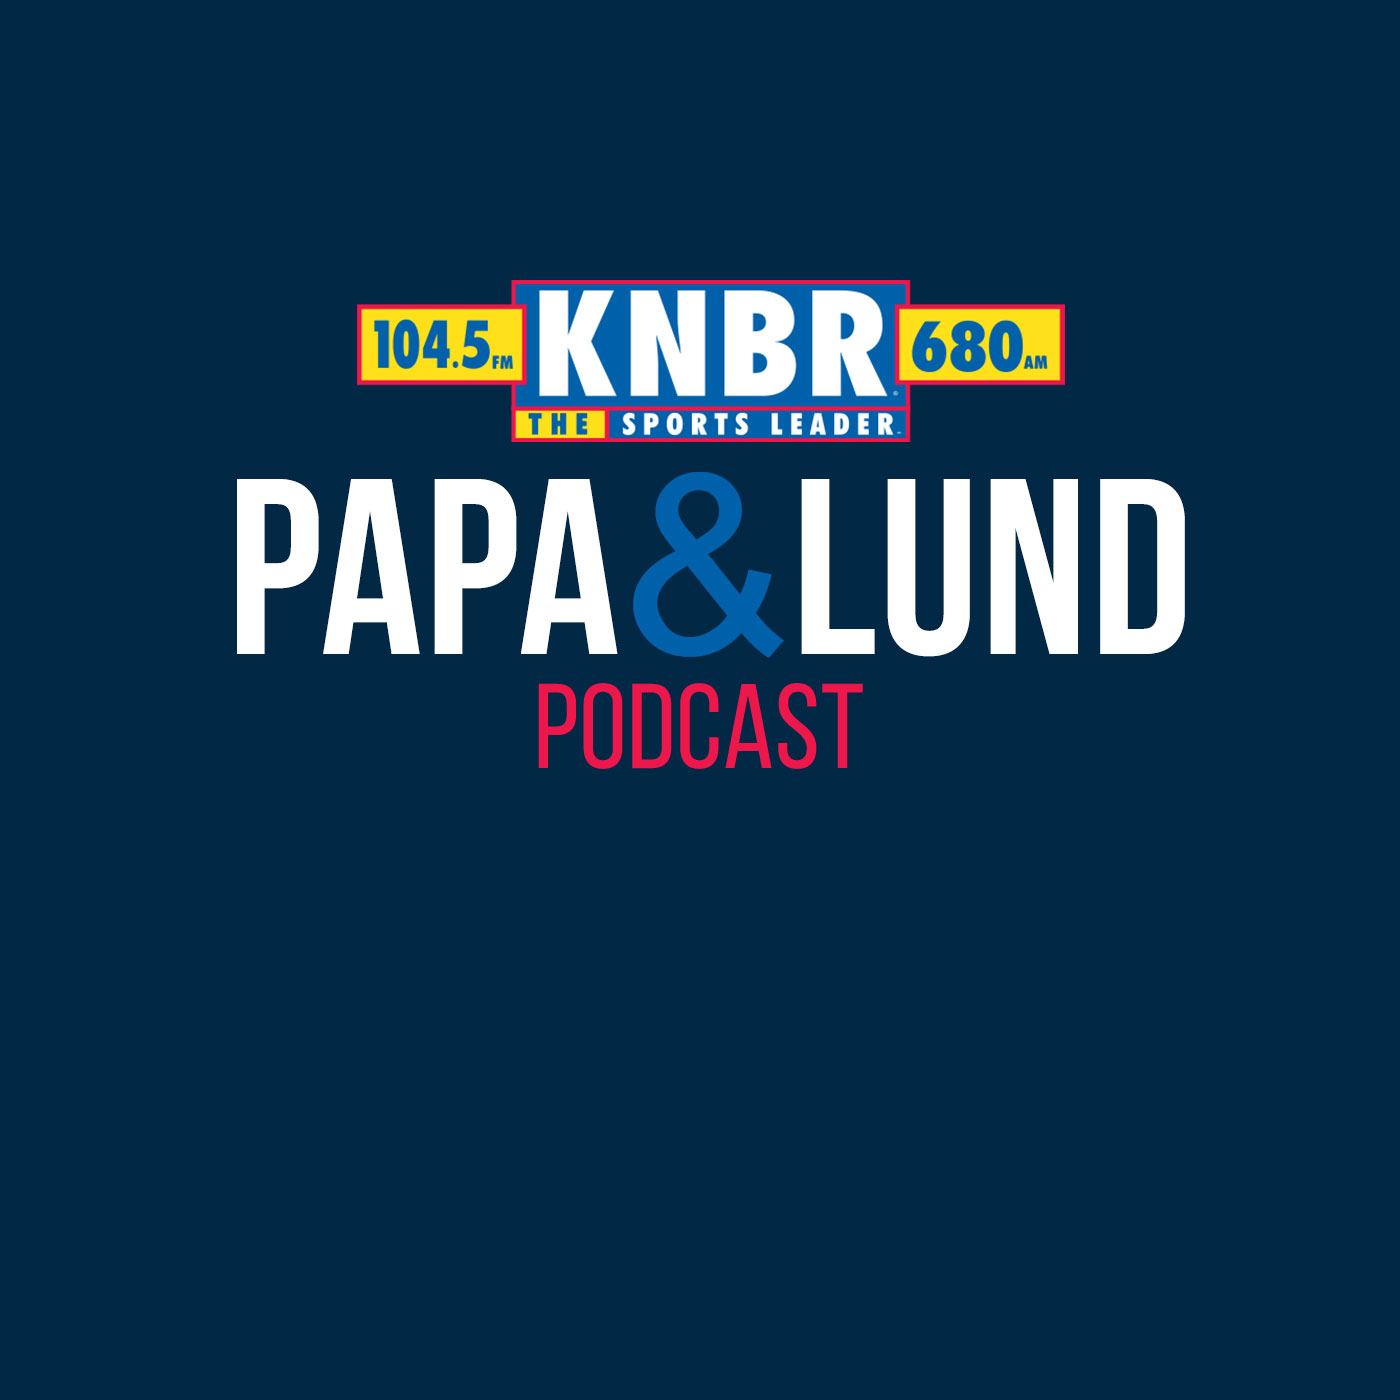 6-10 Chris Mullin joins Papa & Lund to discuss what the Warriors need to do in order to win Game 4 and how he thinks they will respond with their backs against the wall